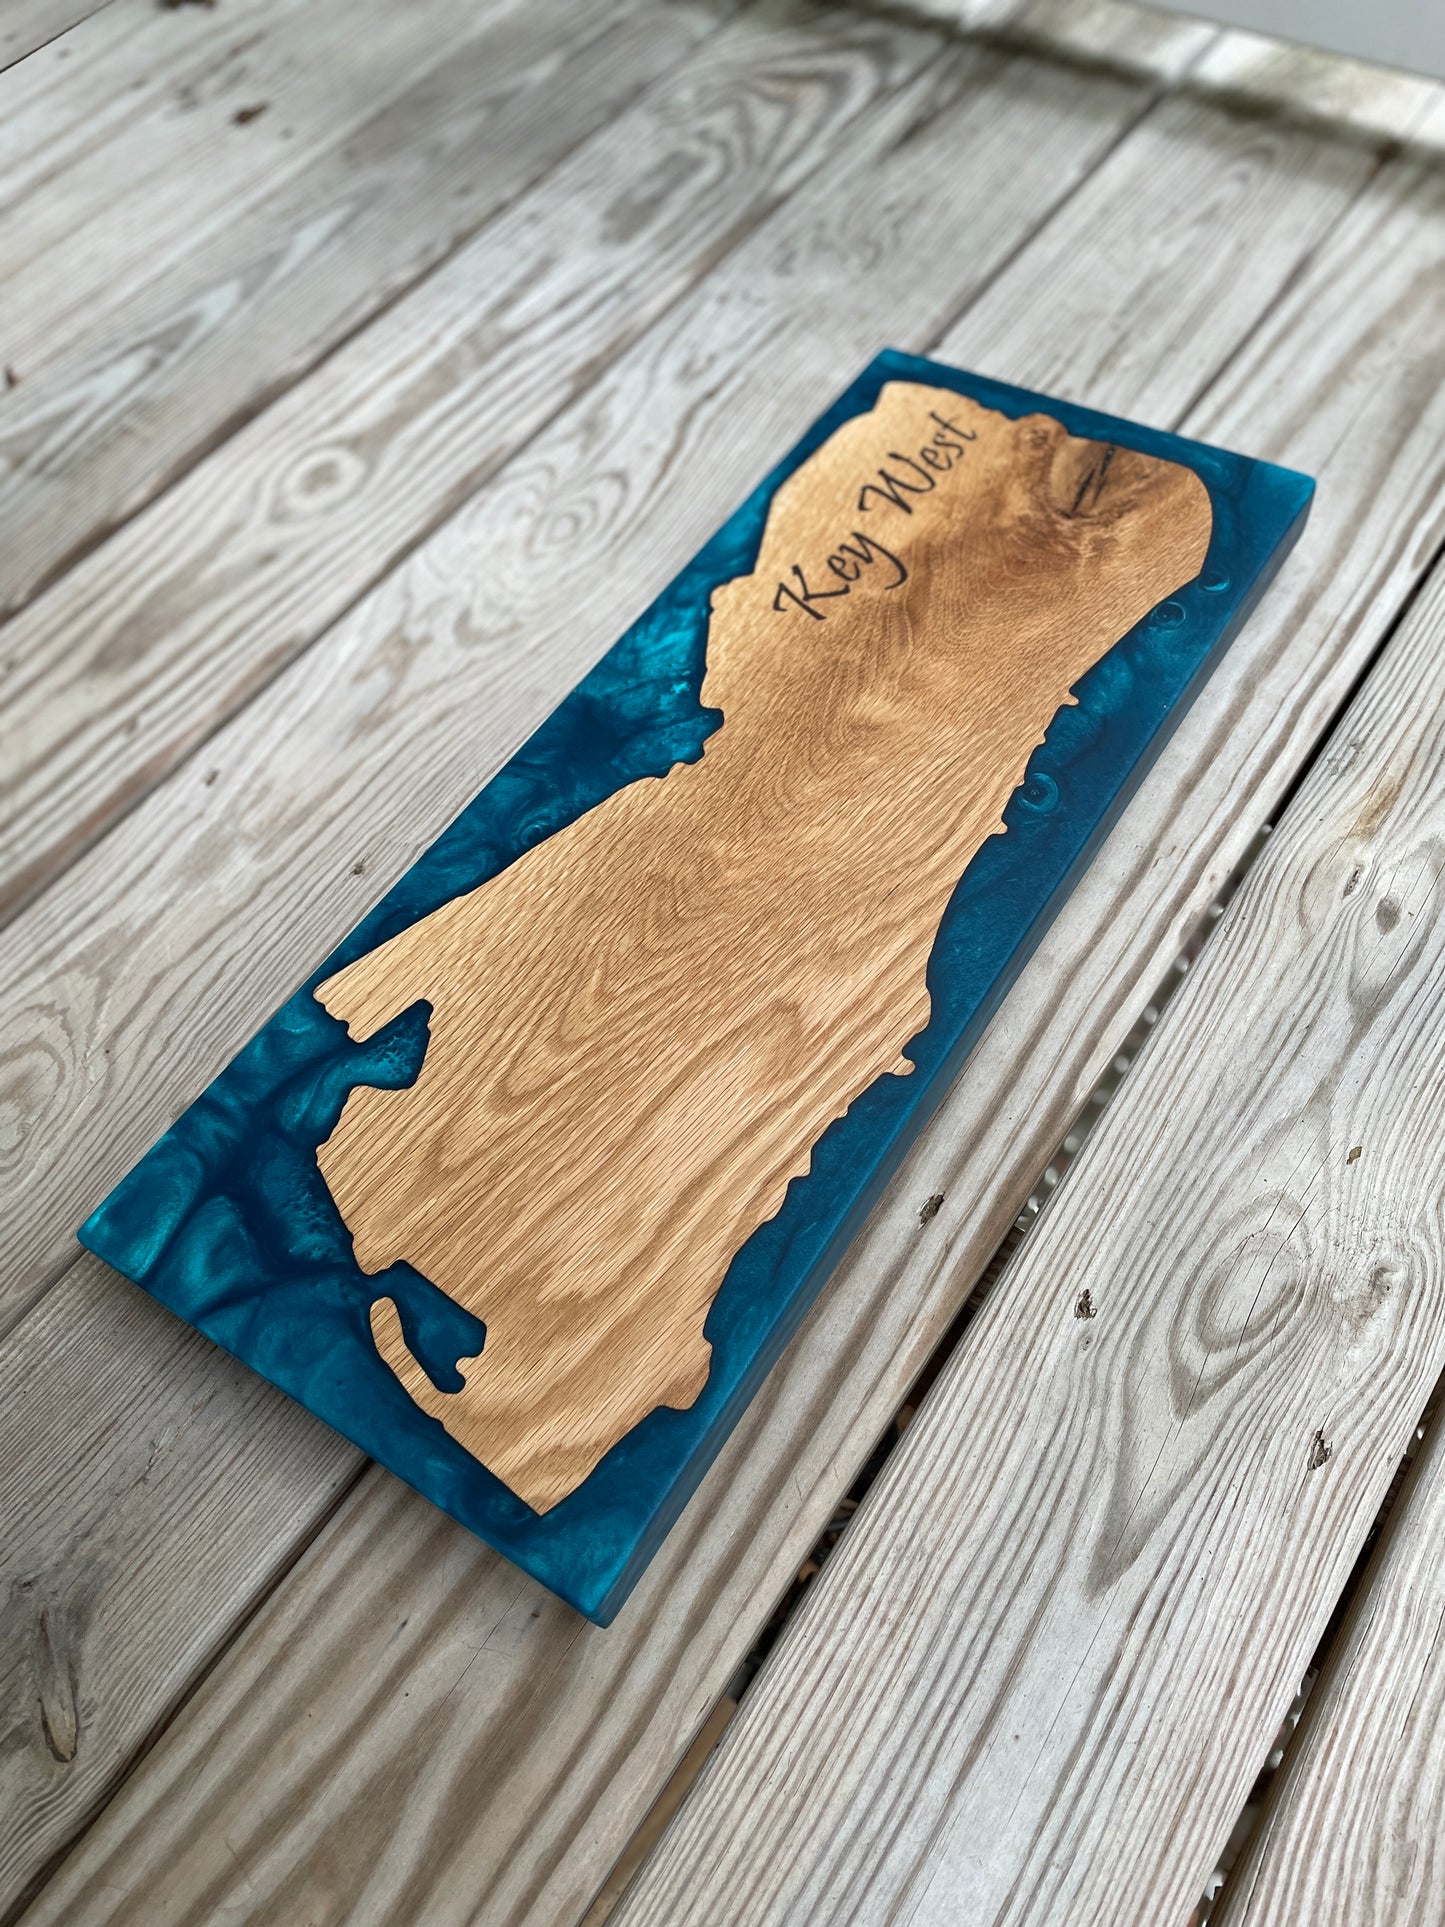 Key West; ash and blue/green epoxy. *Pre-Order*